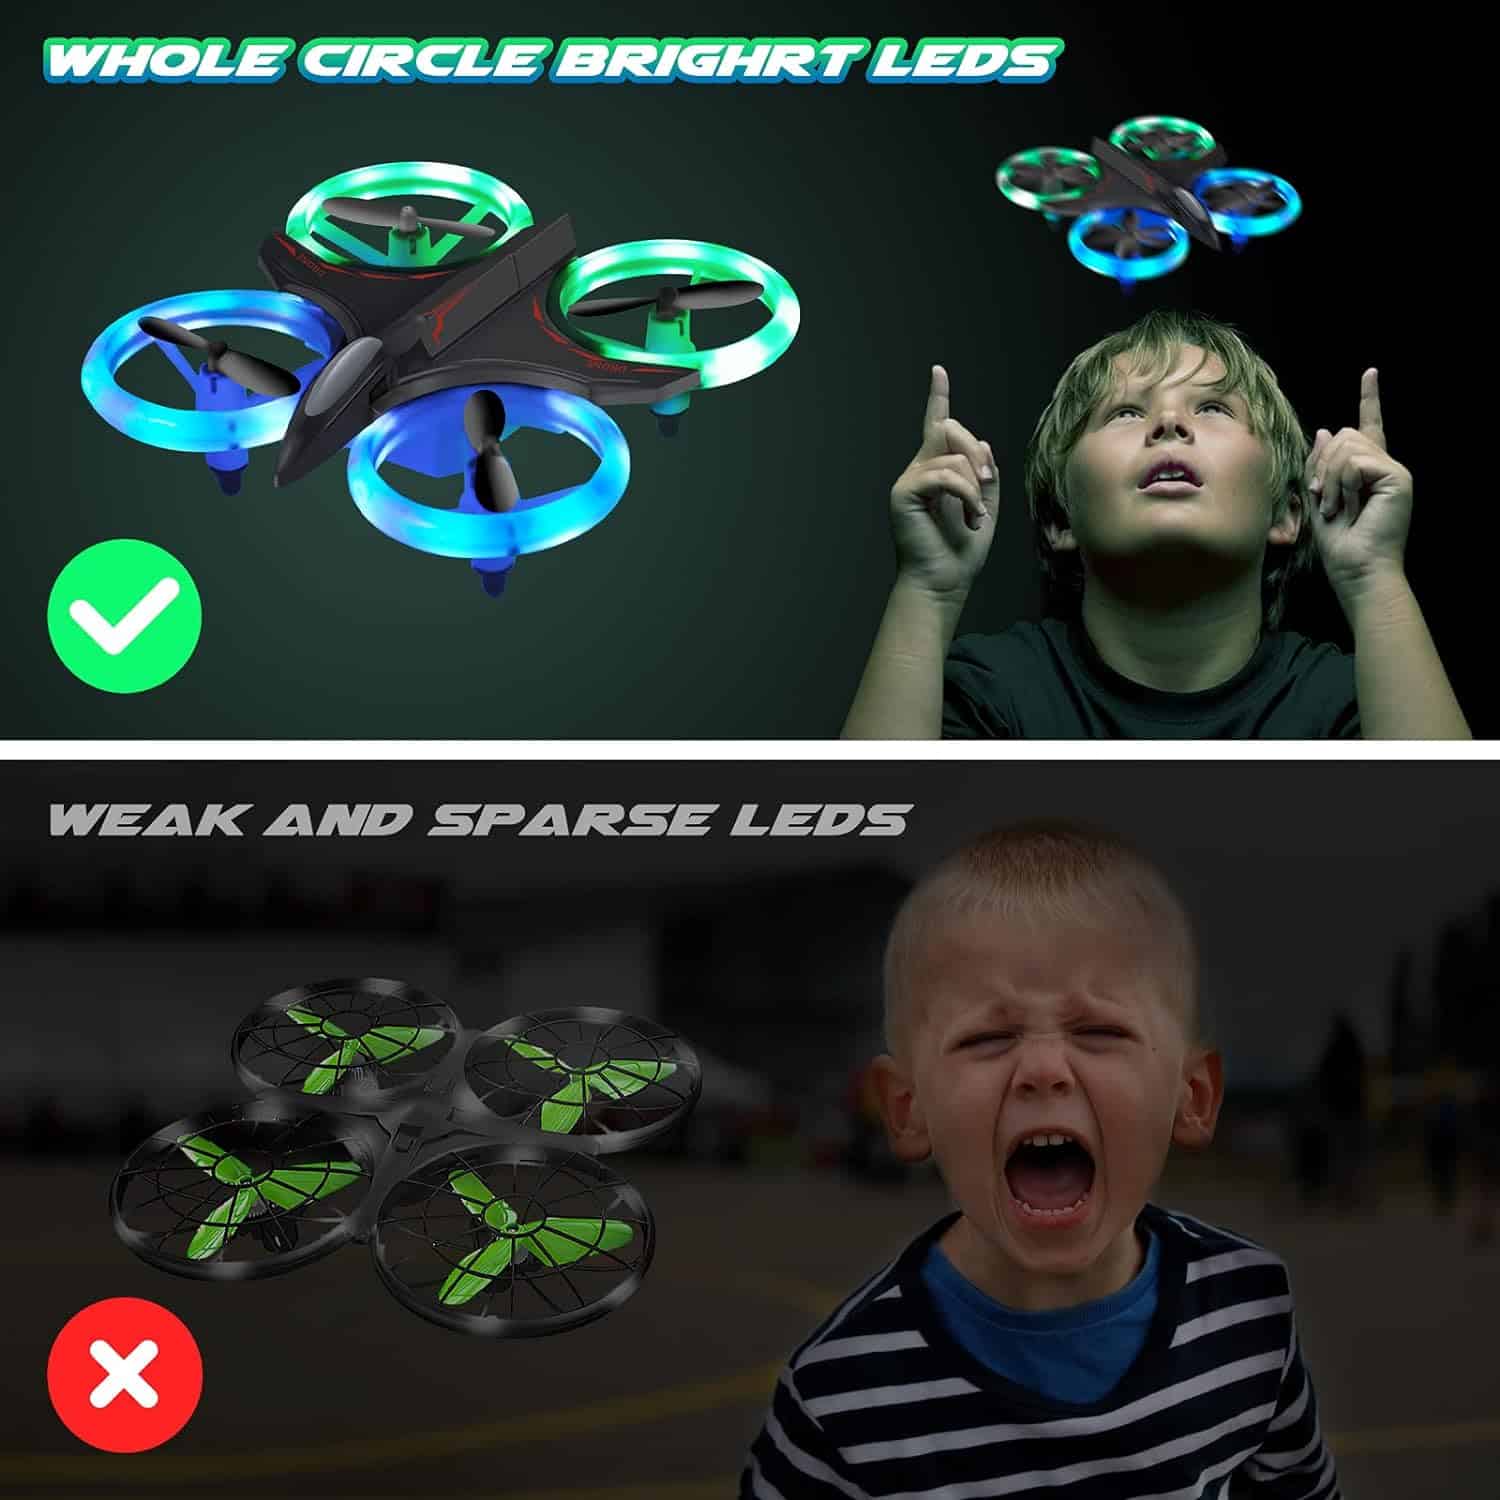 RC Drone: The Best Mini Drone for Kids and Beginners